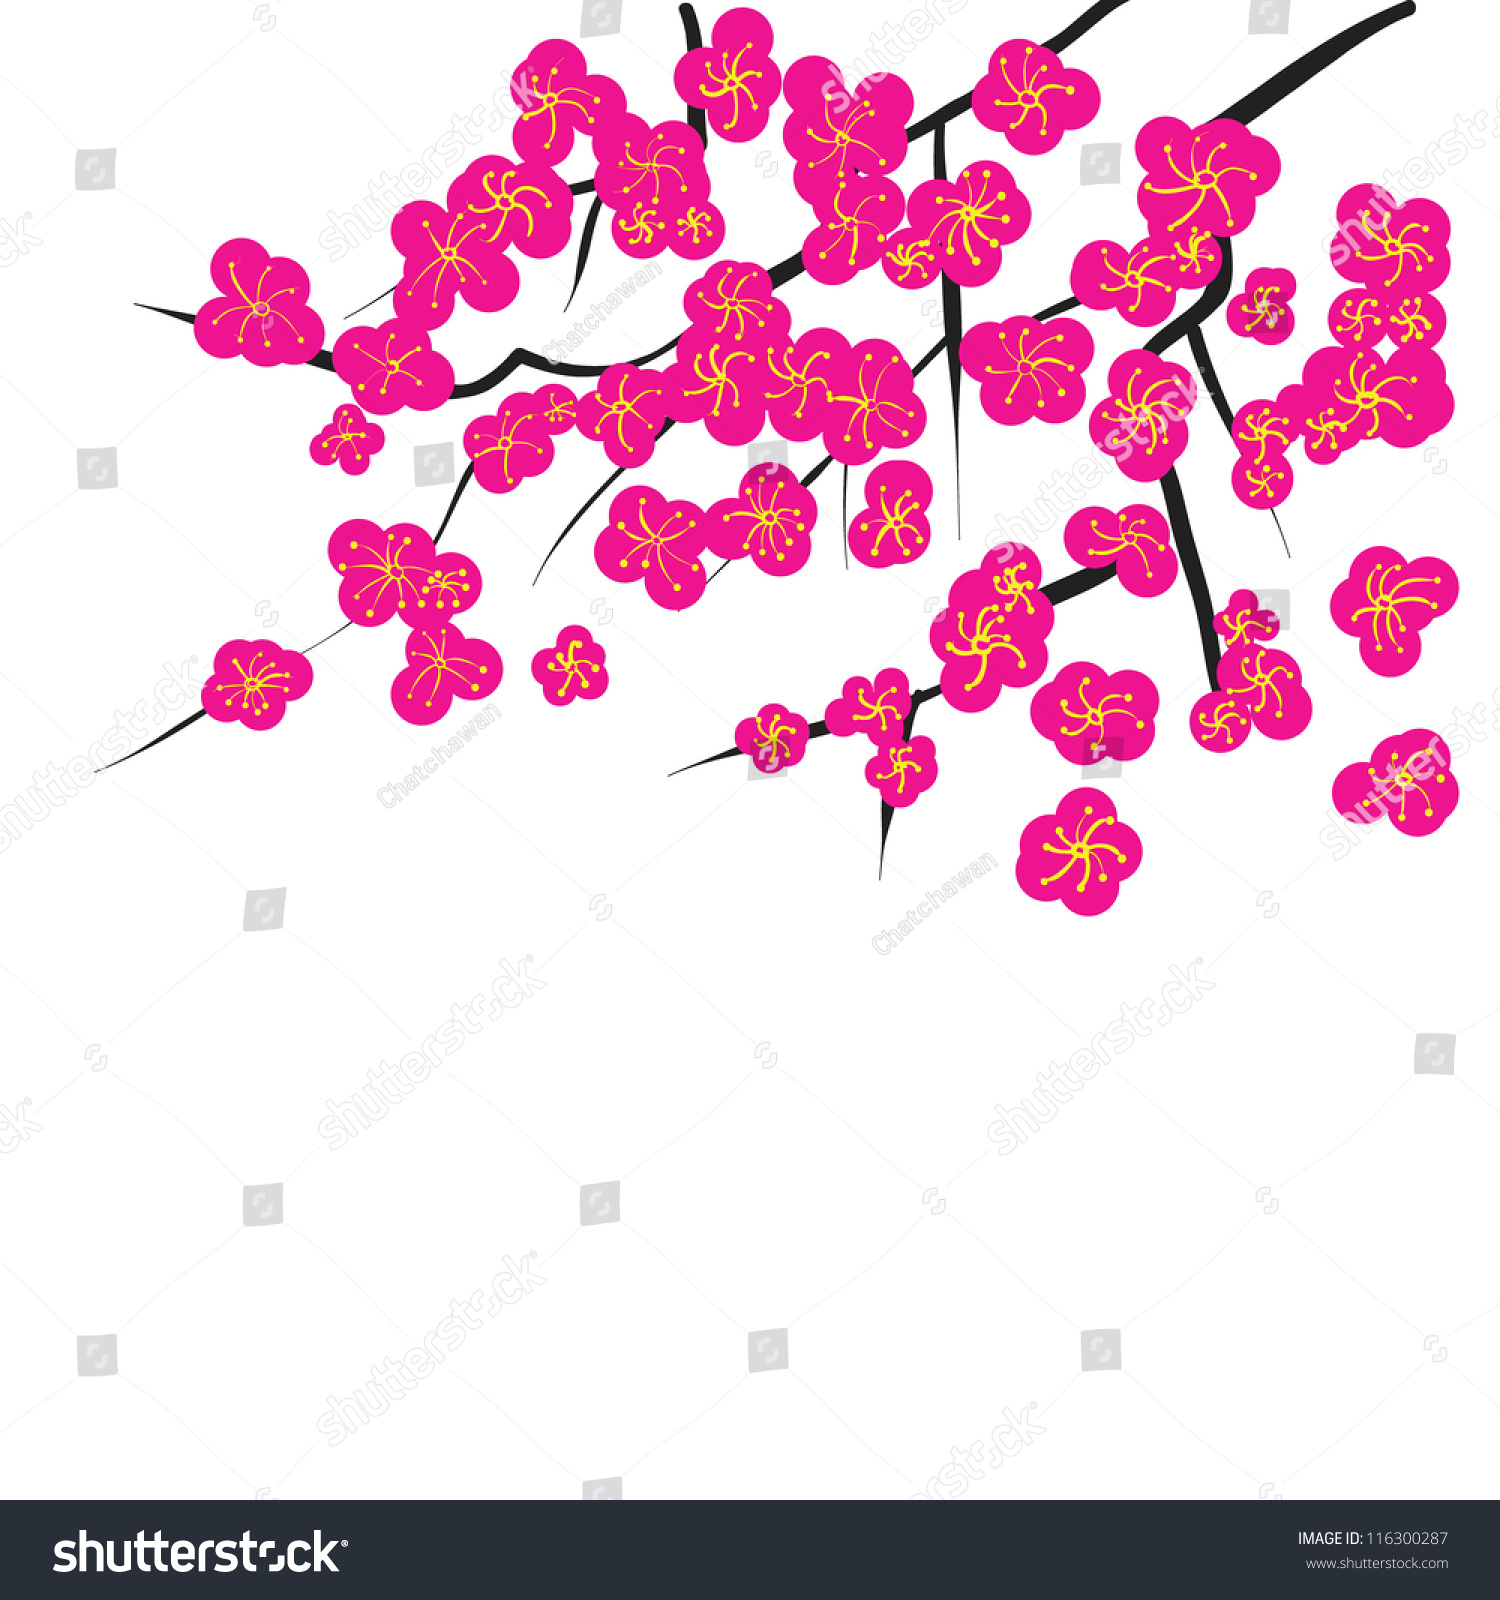 Chinese Style Flower Drawing Vector - 116300287 : Shutterstock